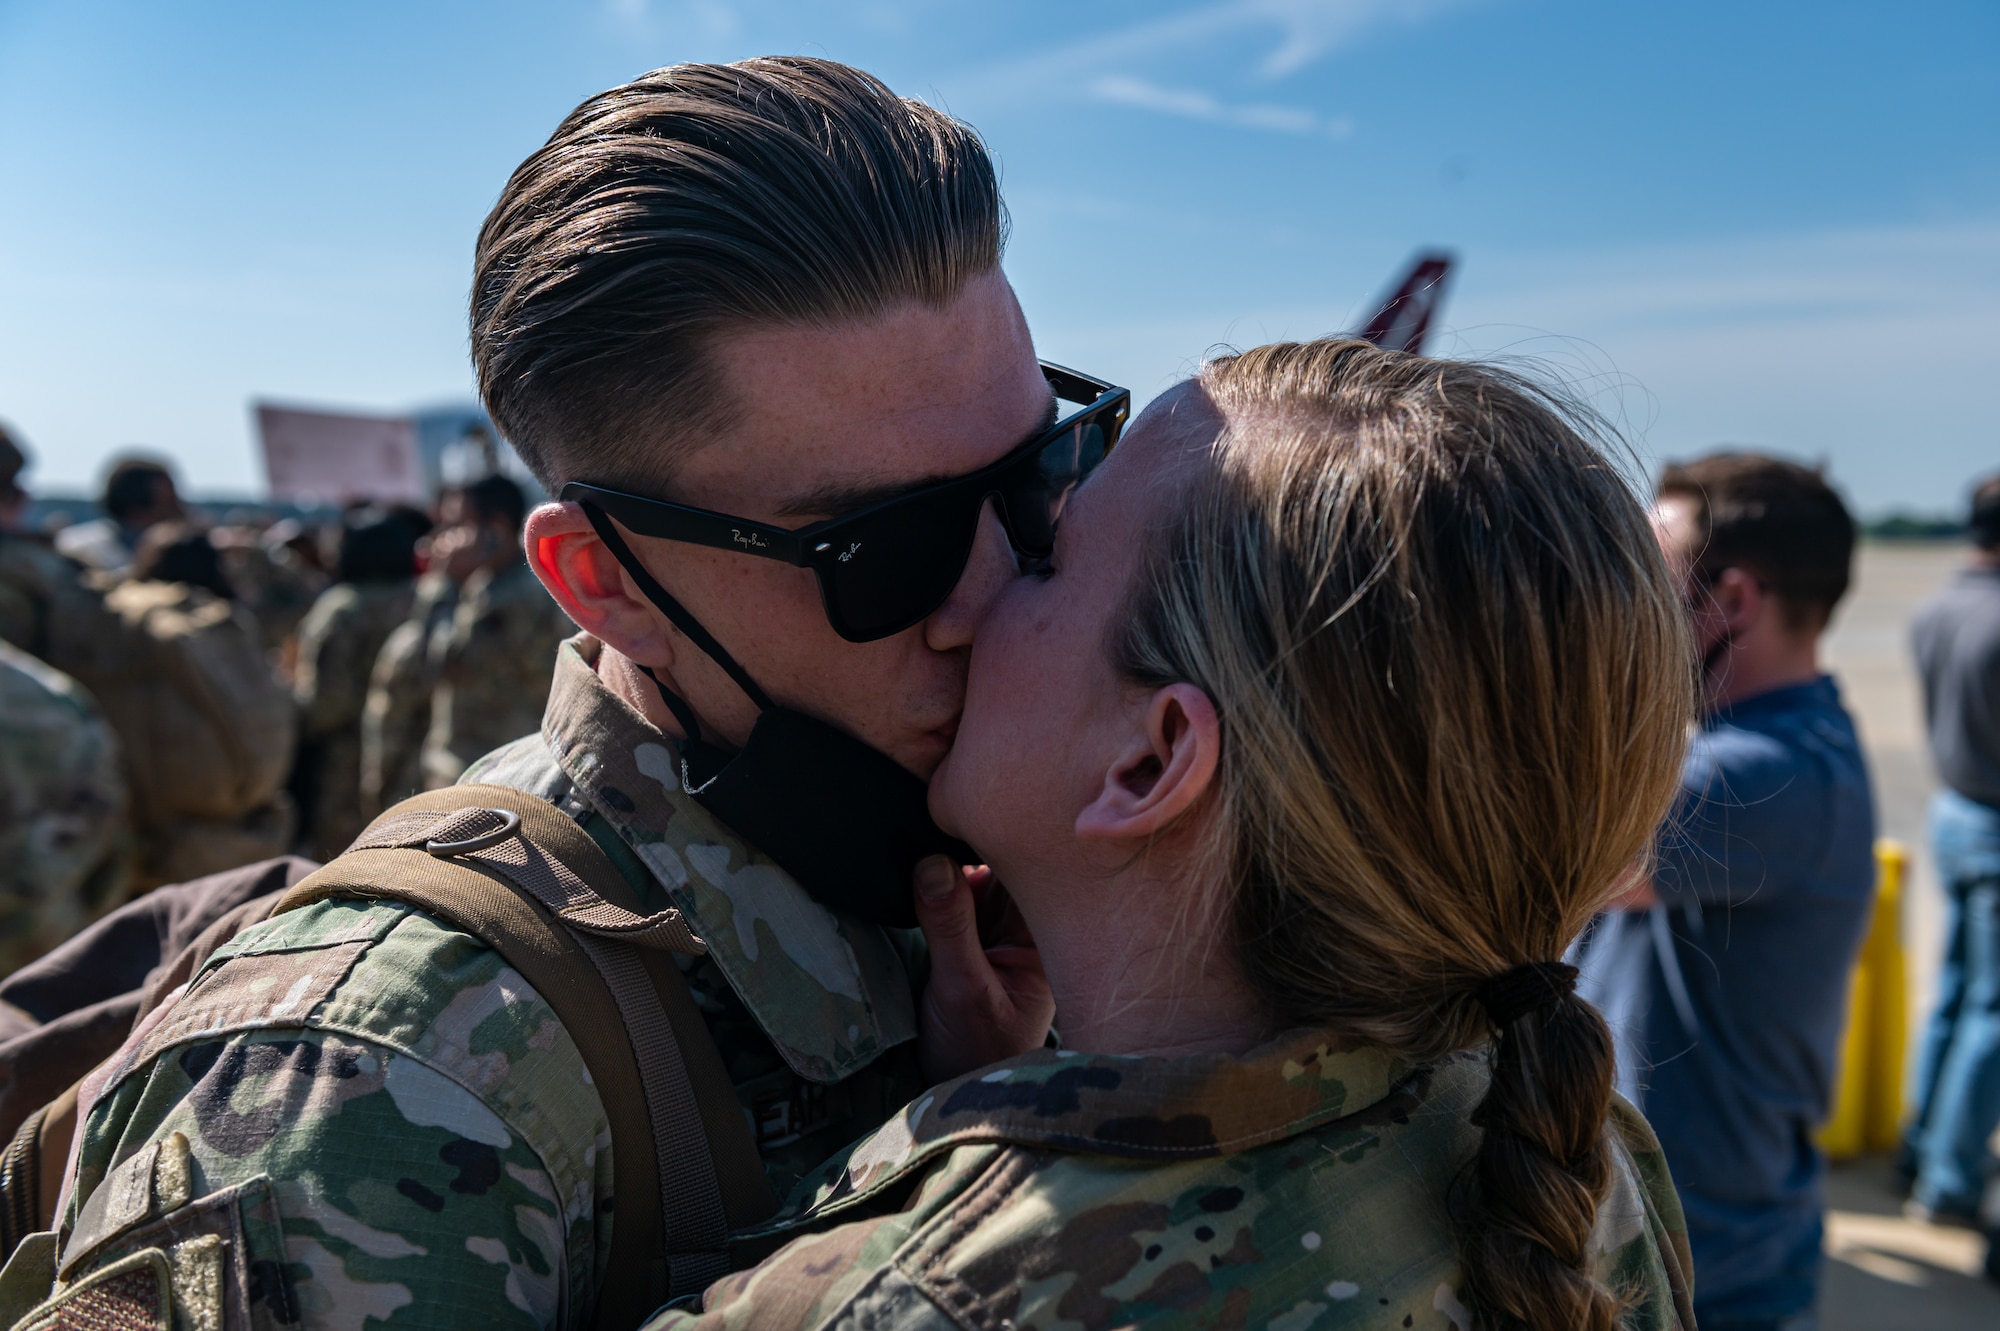 A photo of two Airmen embracing.